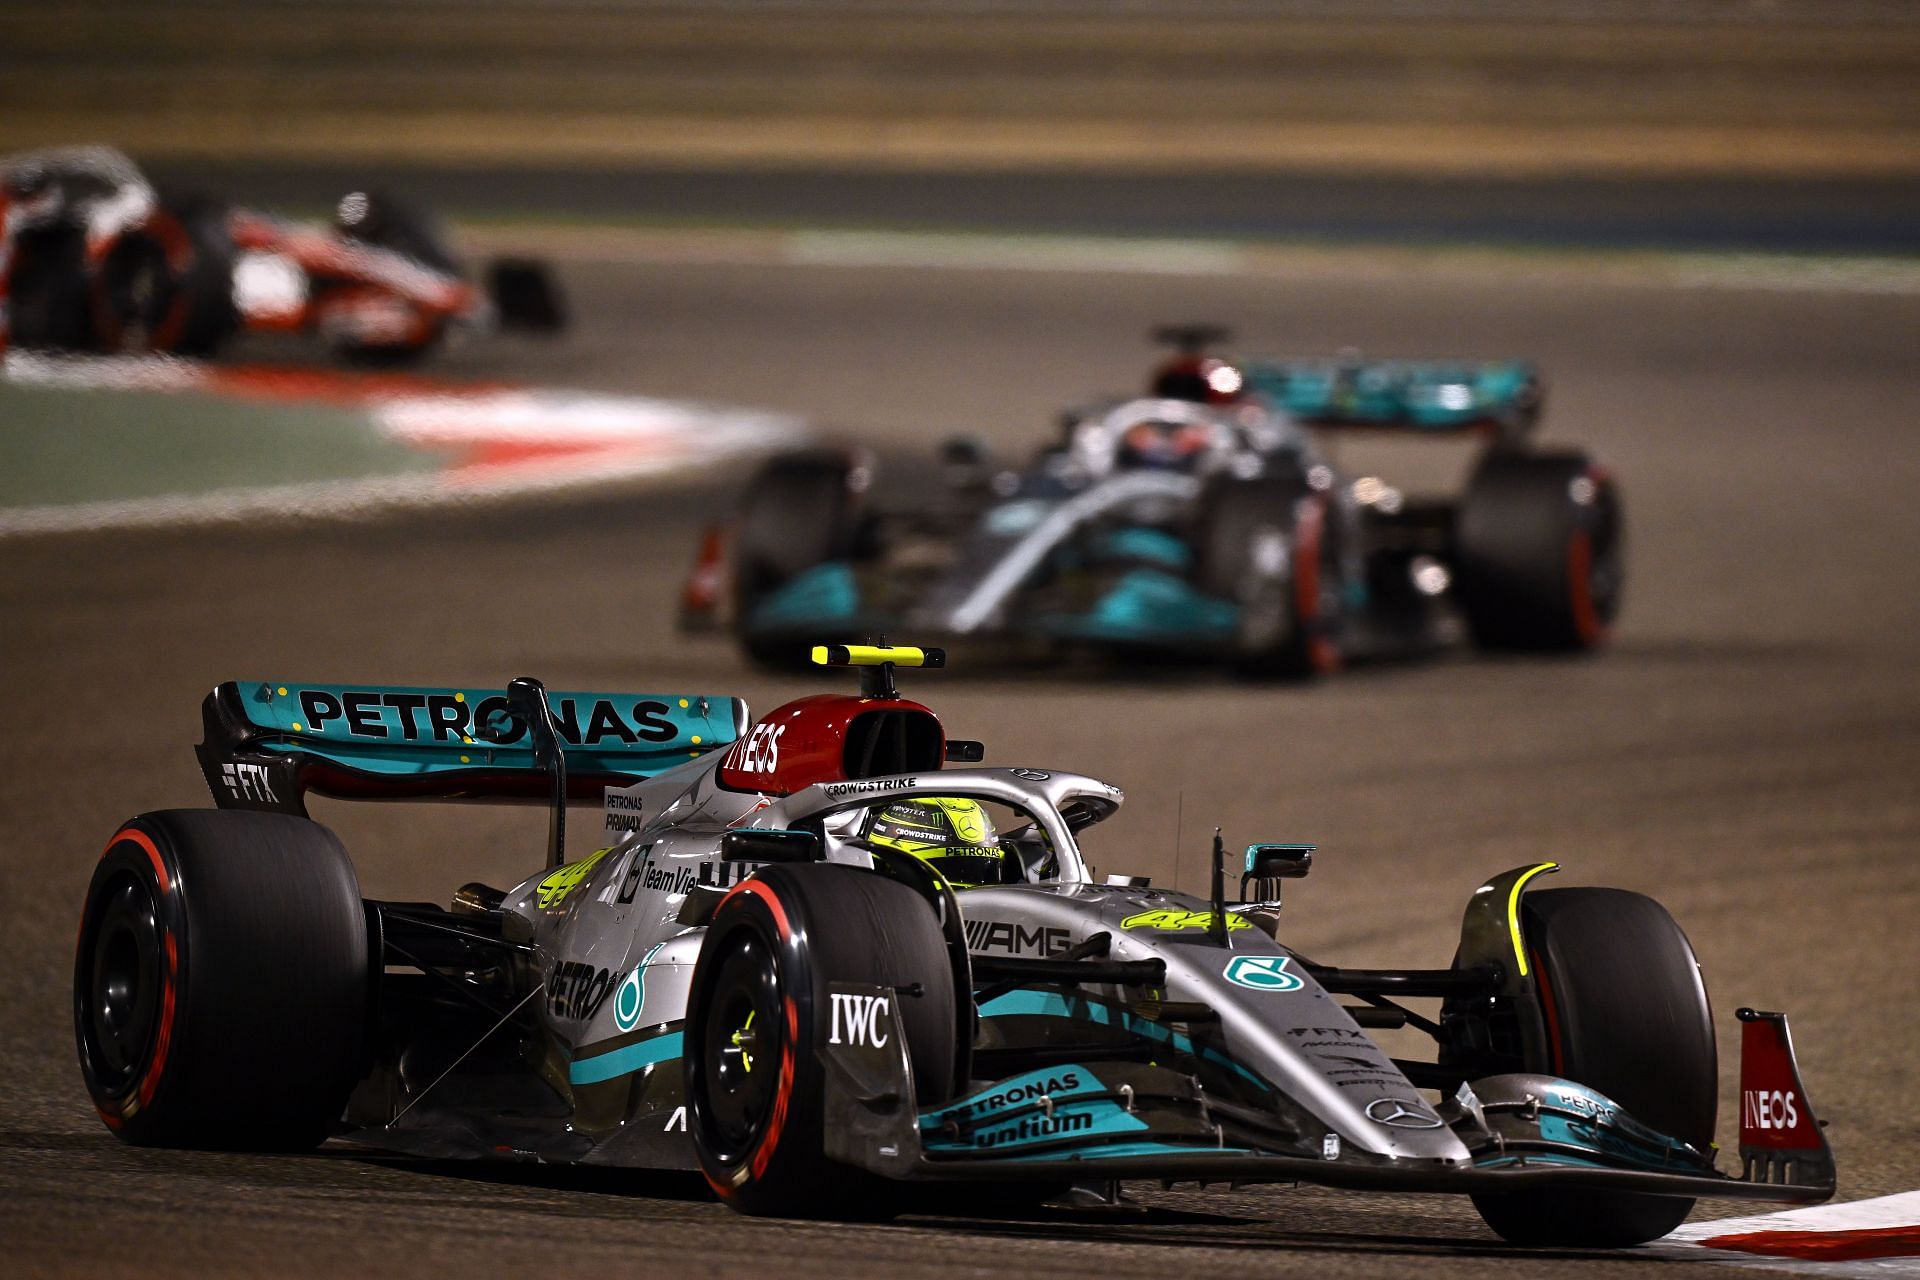 F1 Grand Prix of Bahrain - The two W13s shimmer under the Bahrain floodlights